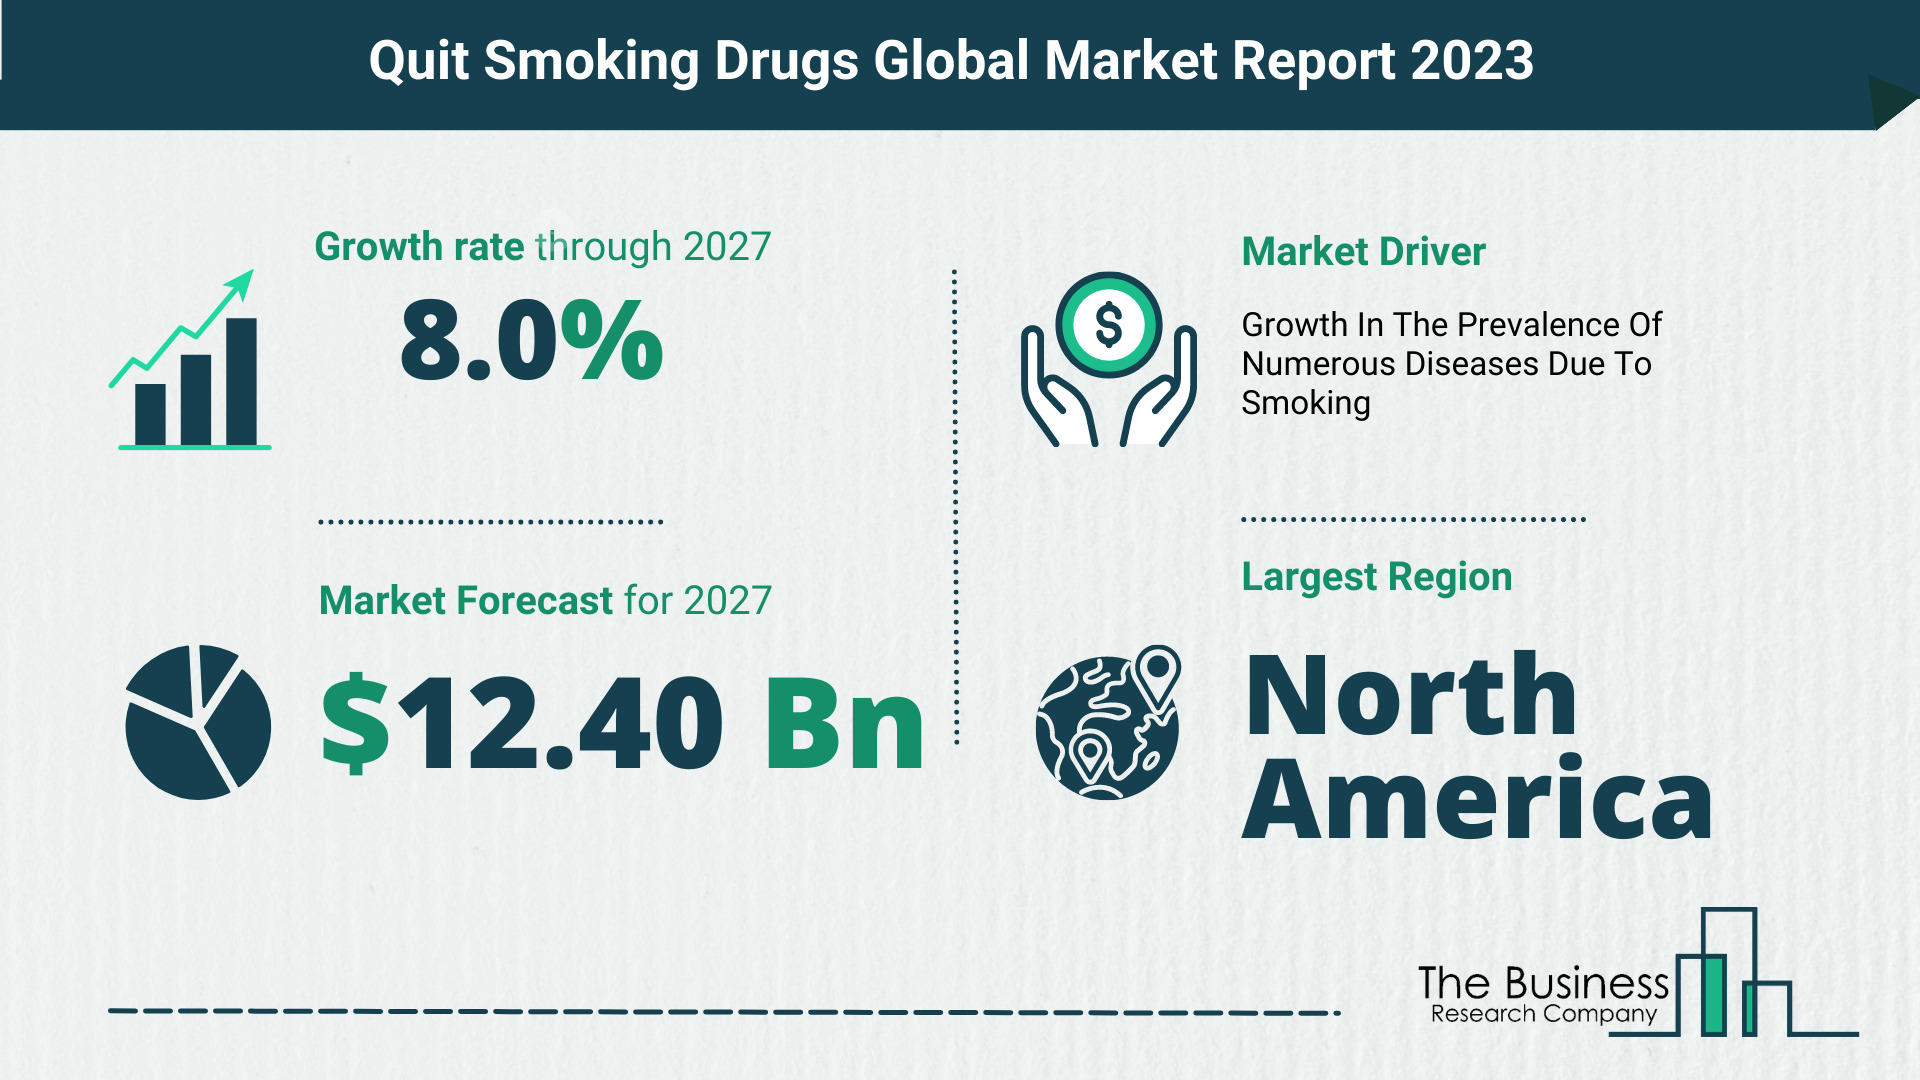 How Will The Quit Smoking Drugs Market Globally Expand In 2023?